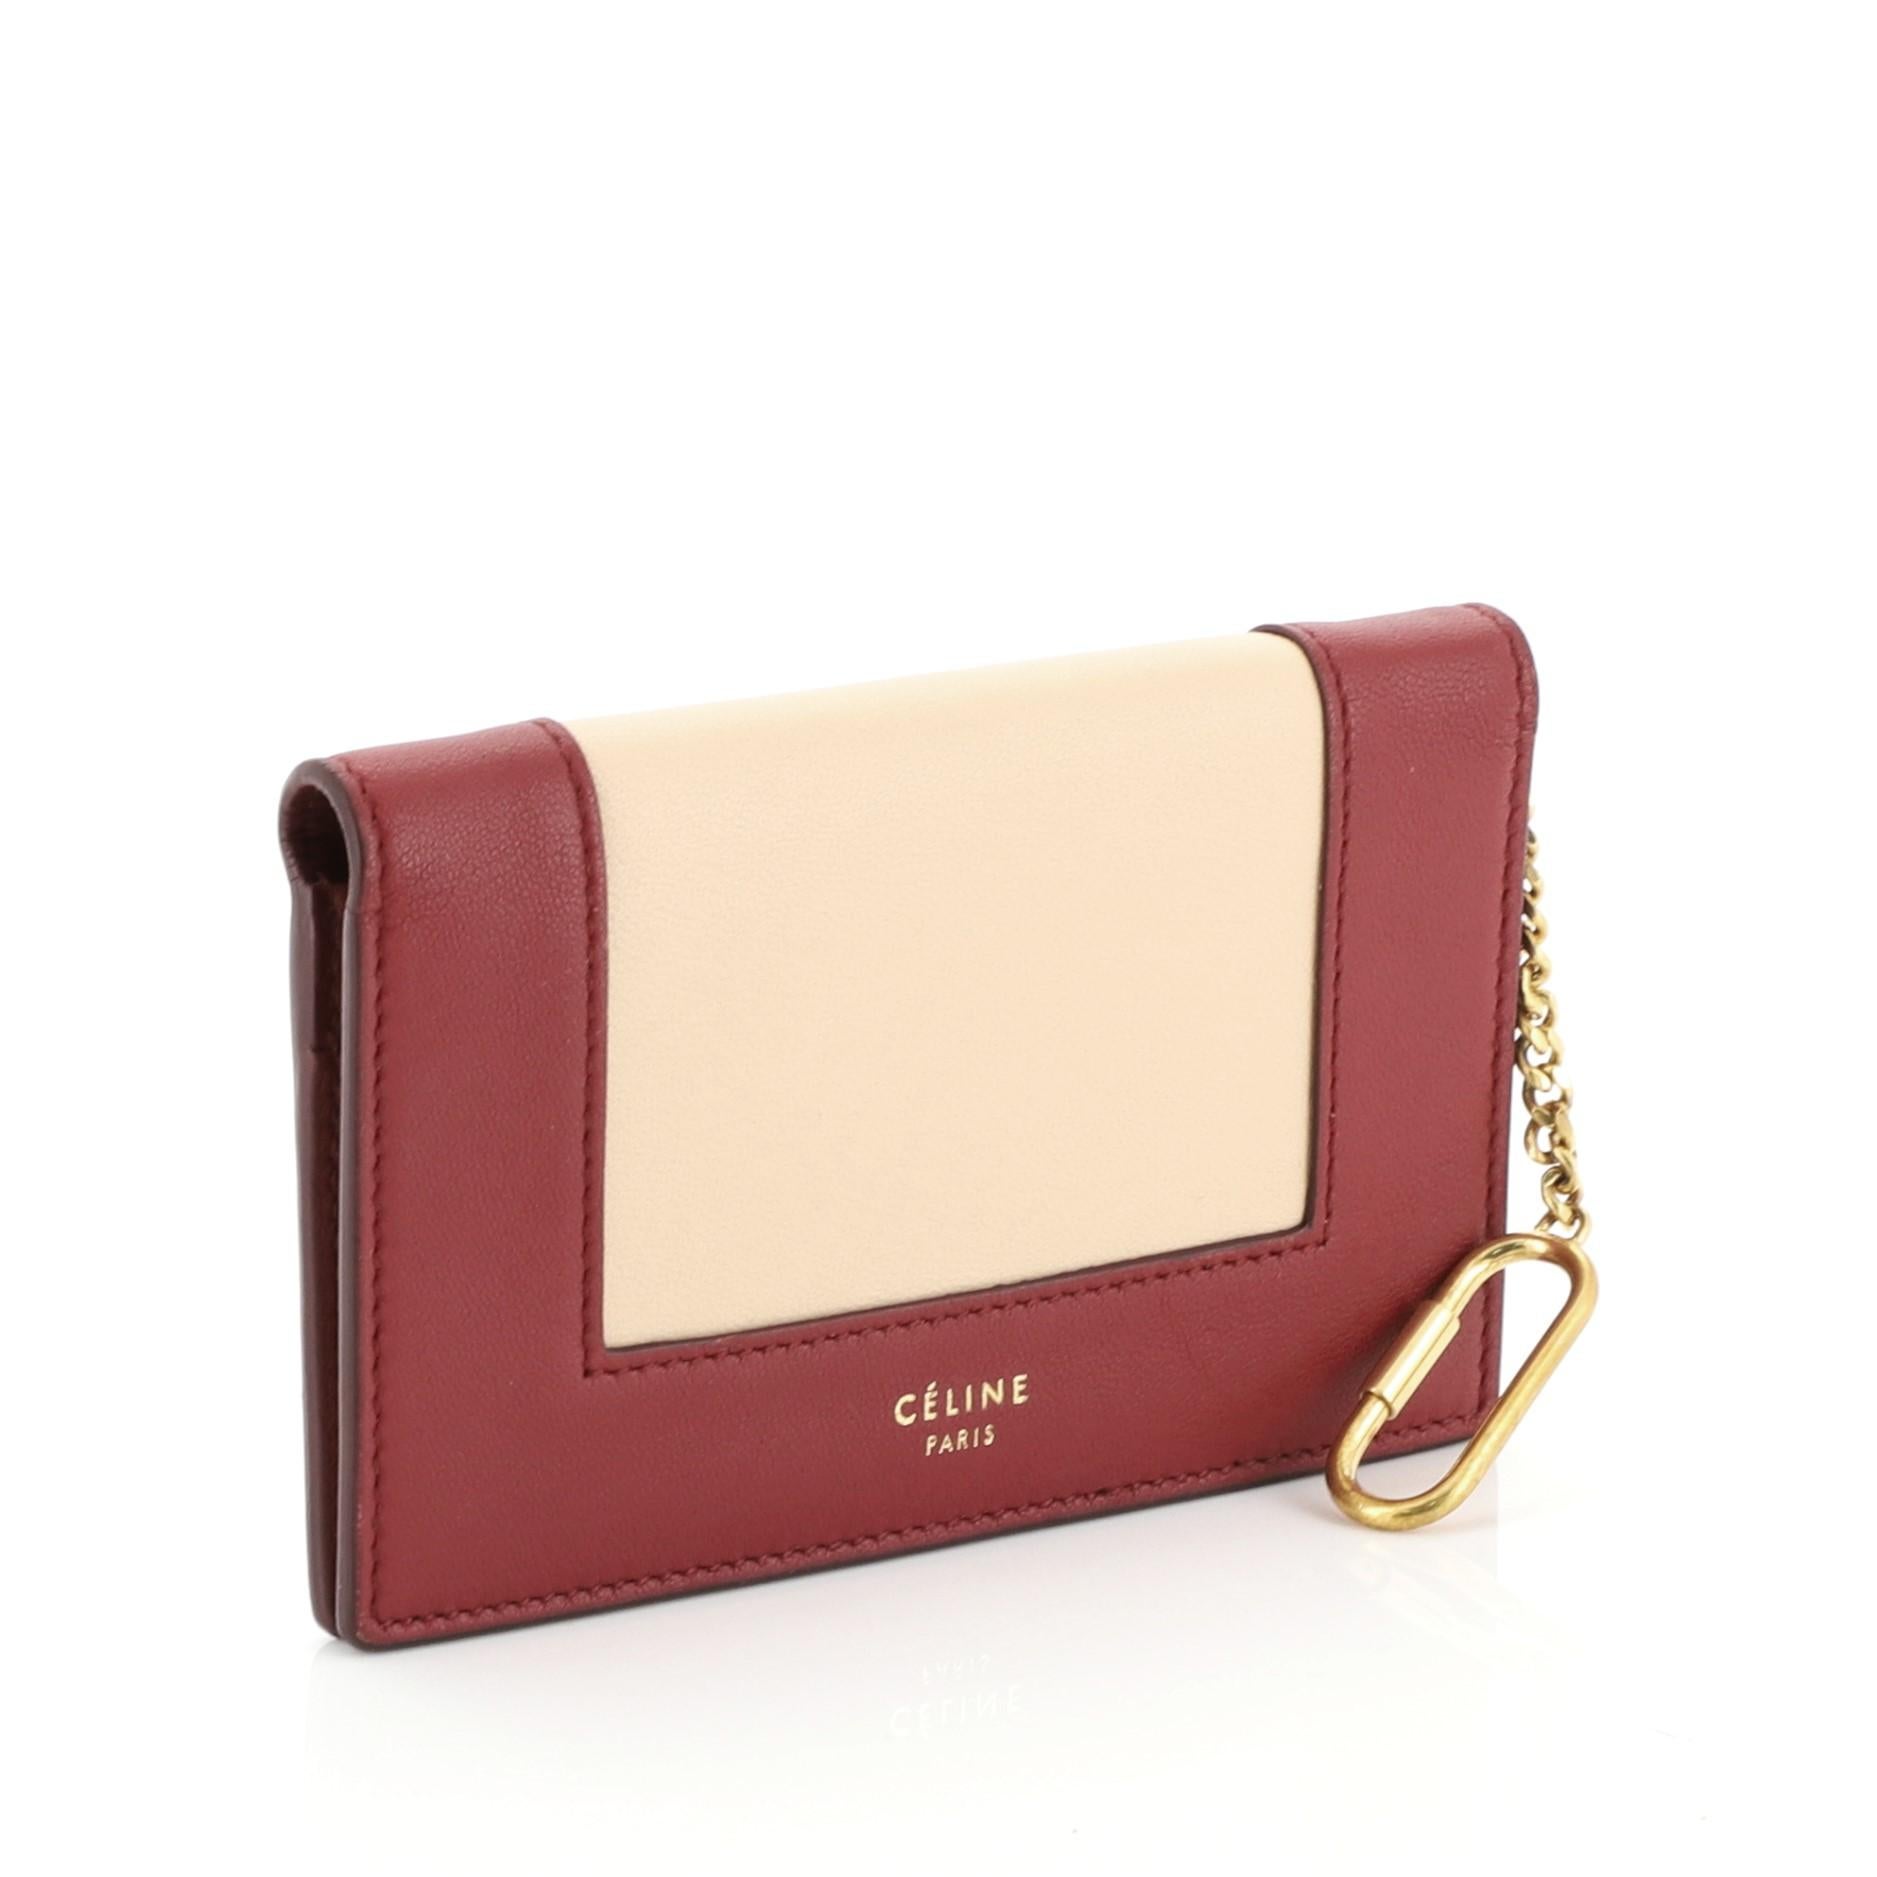 This Celine Frame Coin Purse Leather, crafted in red leather, features a full frontal flap with snap button closure and gold-tone hardware accents. It opens to a red leather interior with multiple card slots, zip pocket and slip pockets 

Estimated